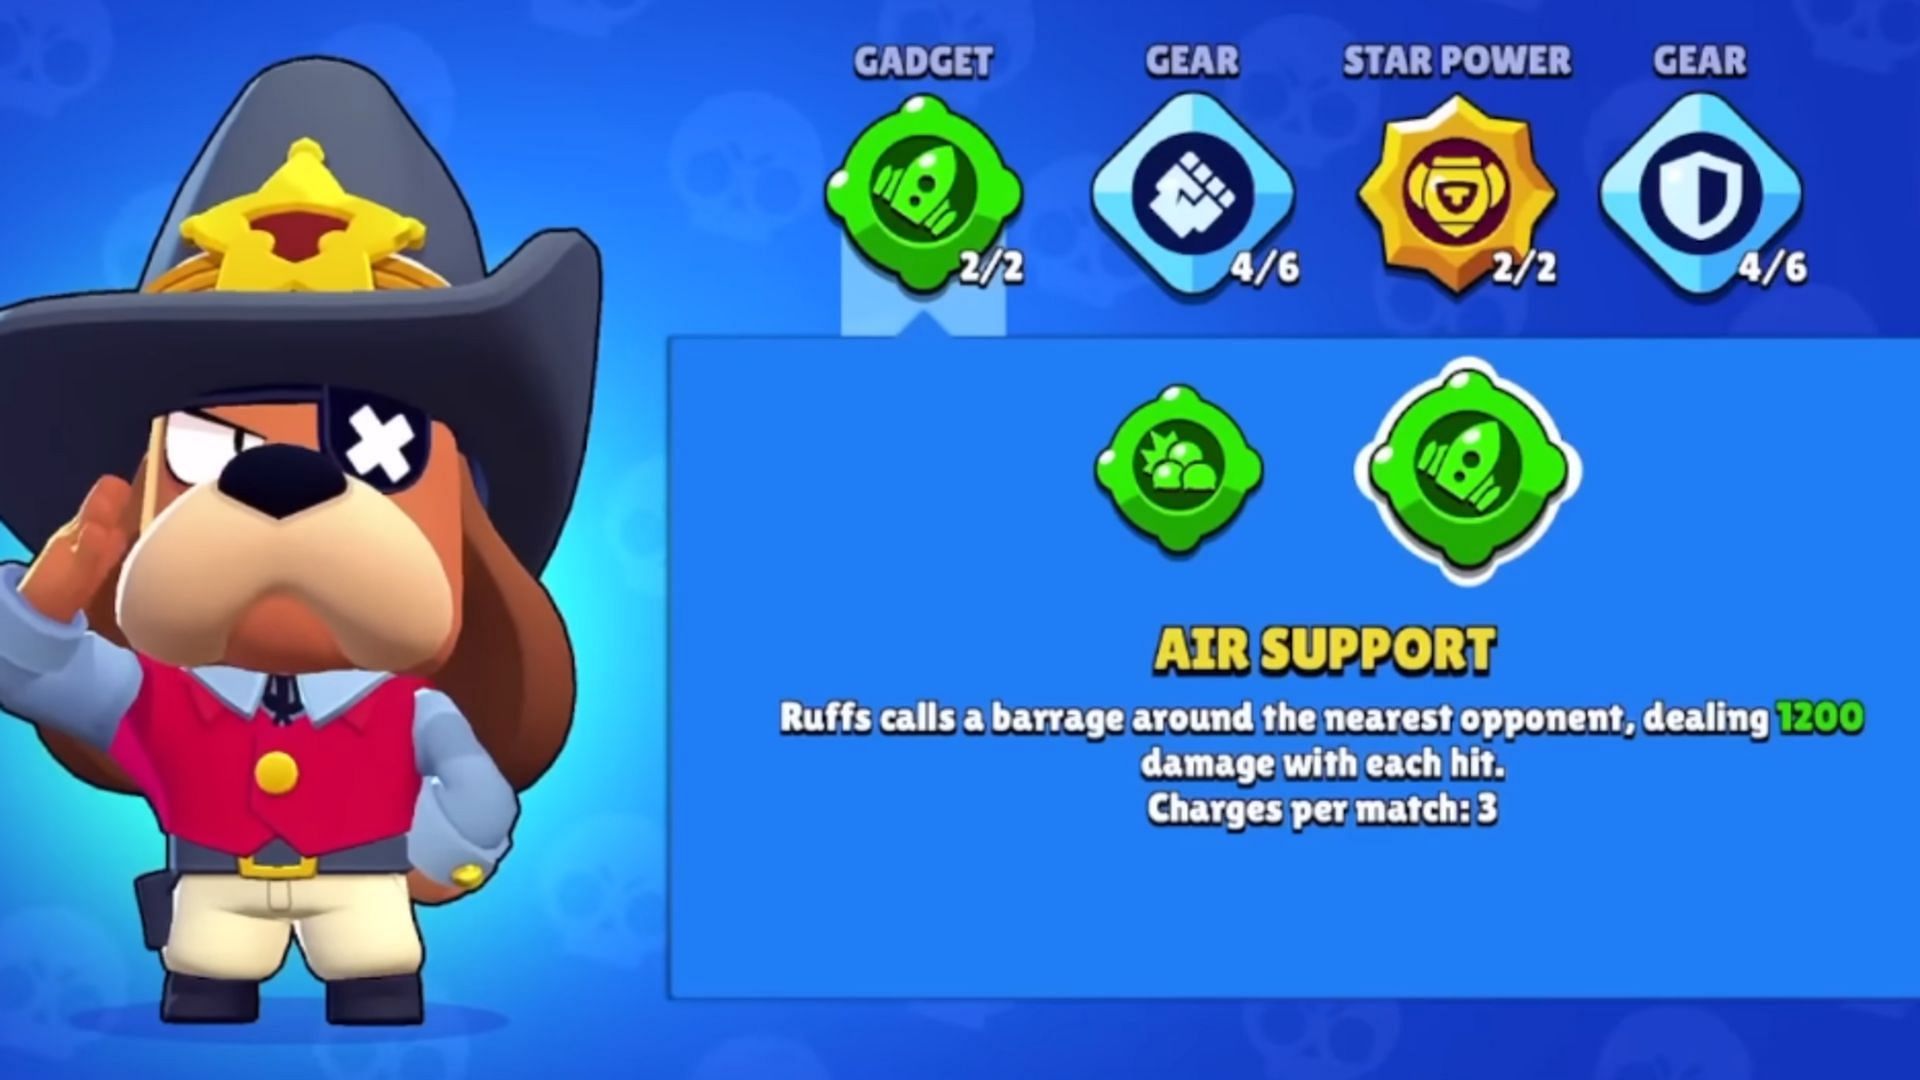 Air Support Gadget (Image via Supercell)